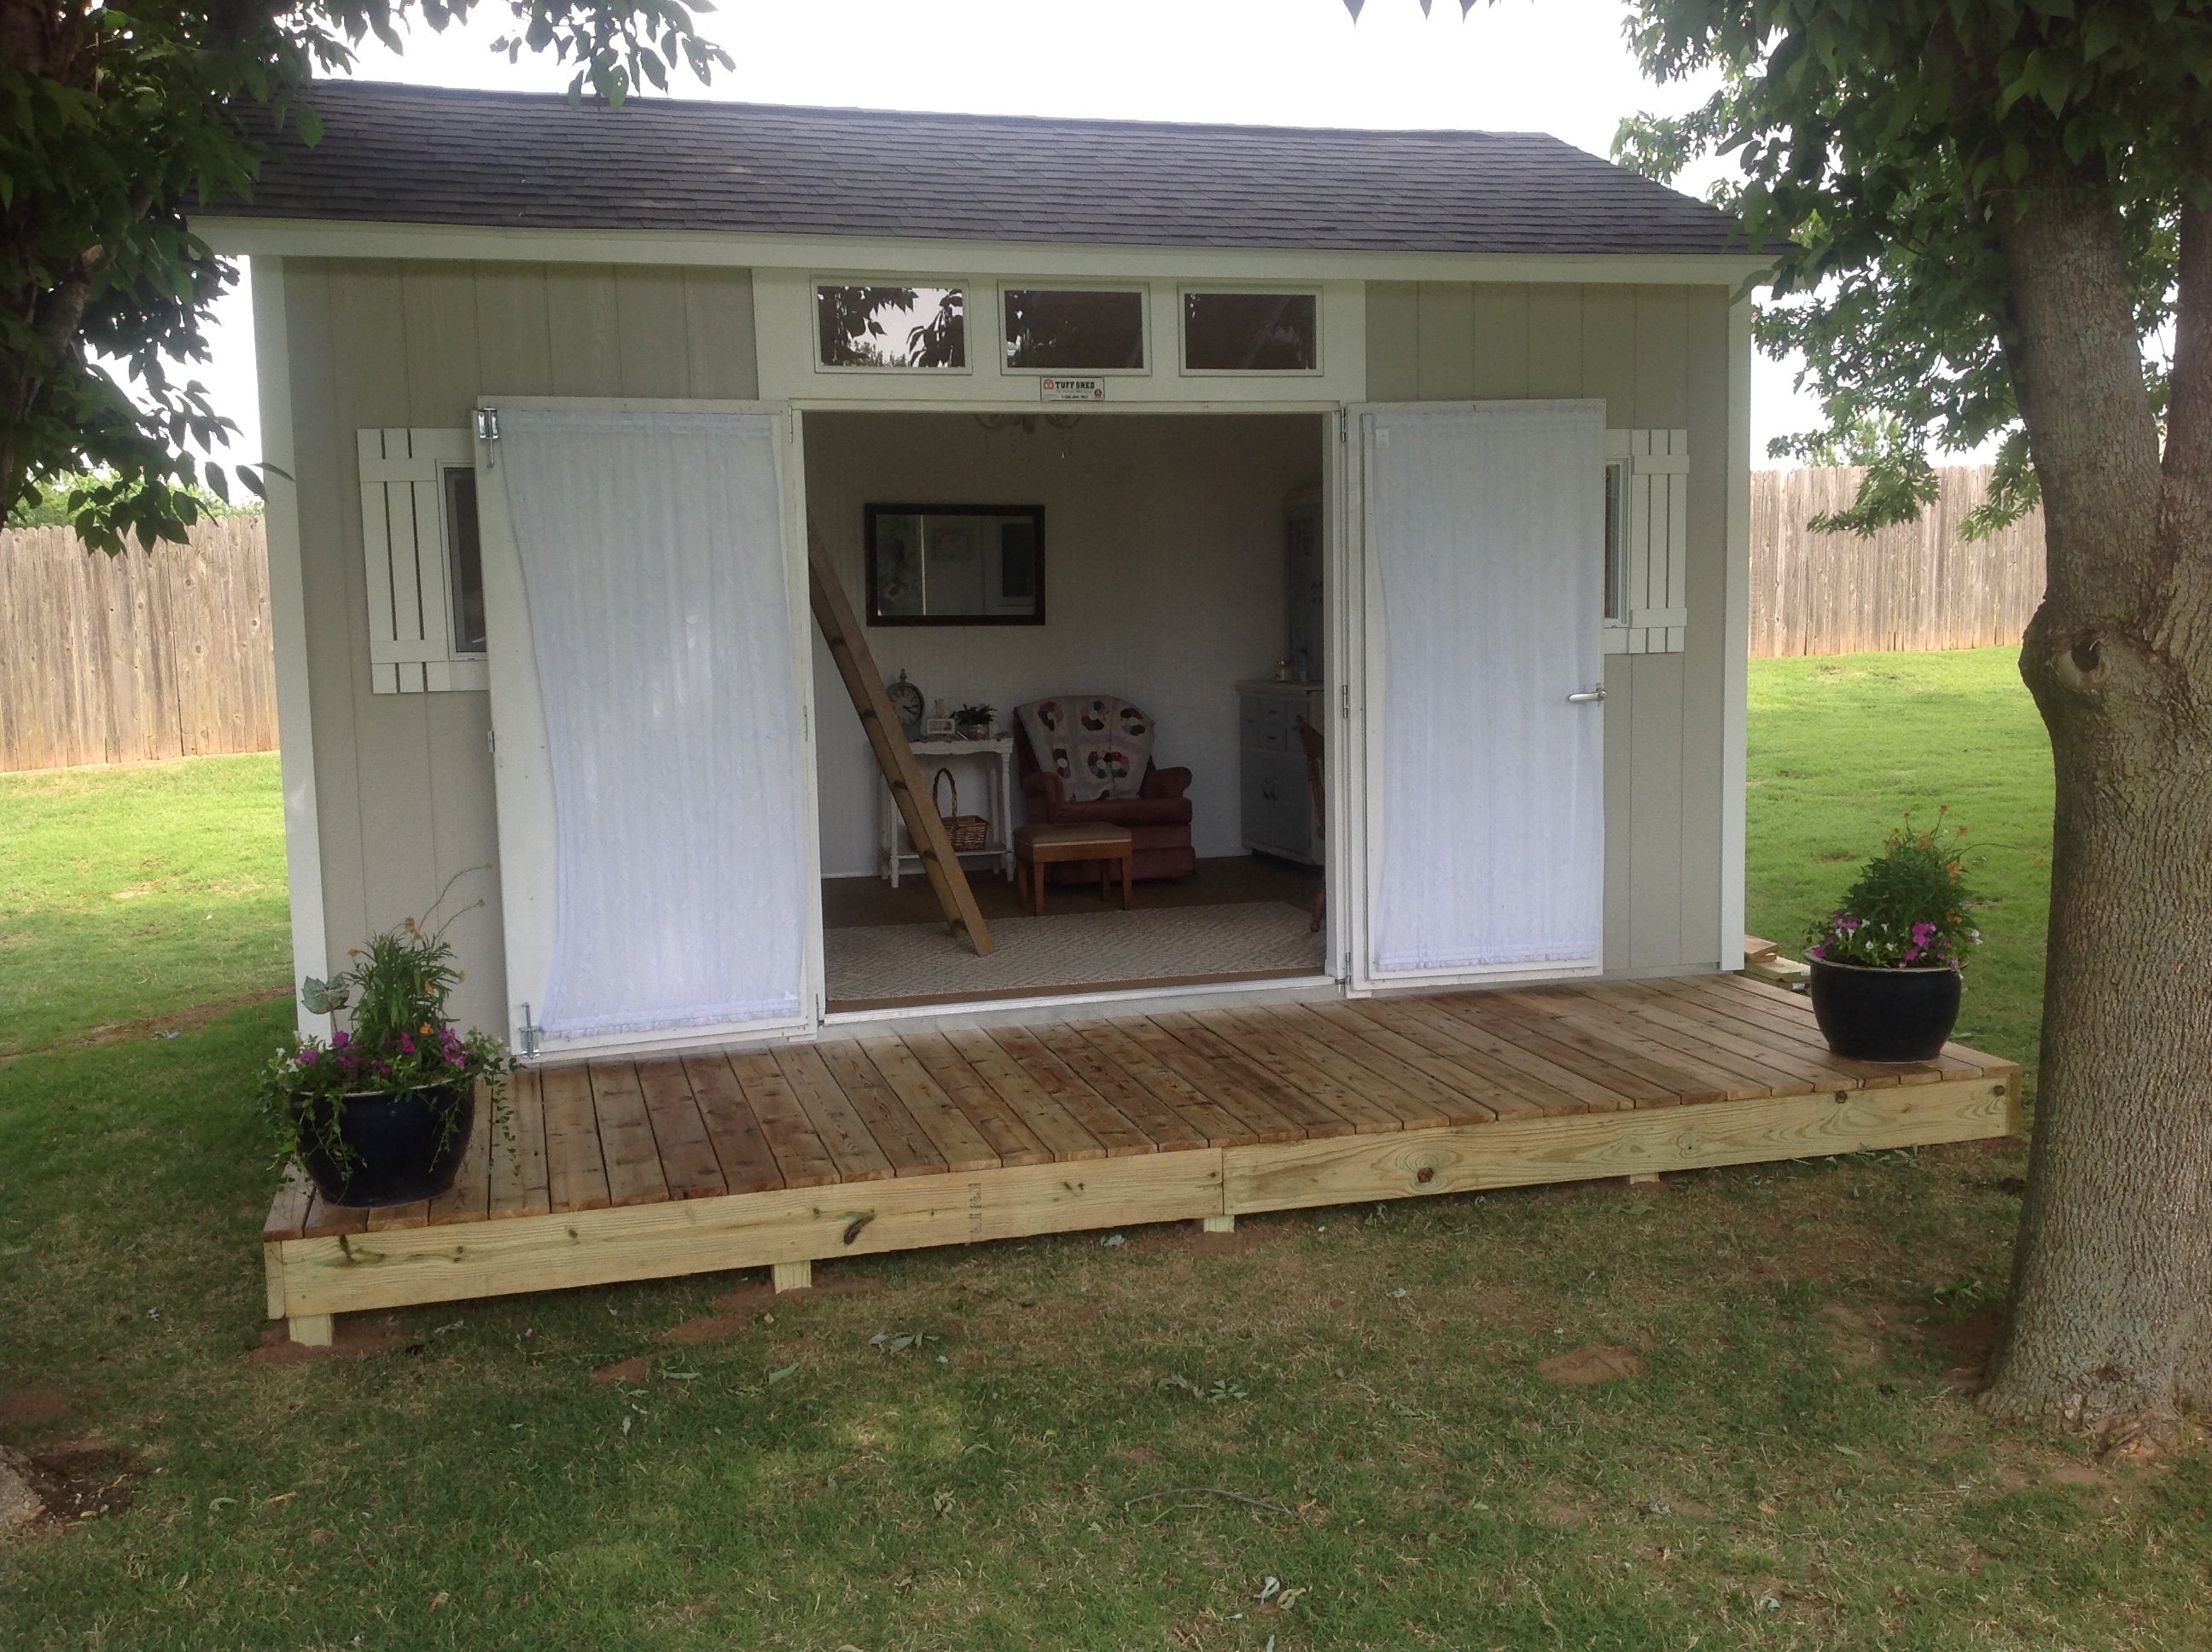 Shabby Chic Meets the Backyard Shed - Tuff Shed